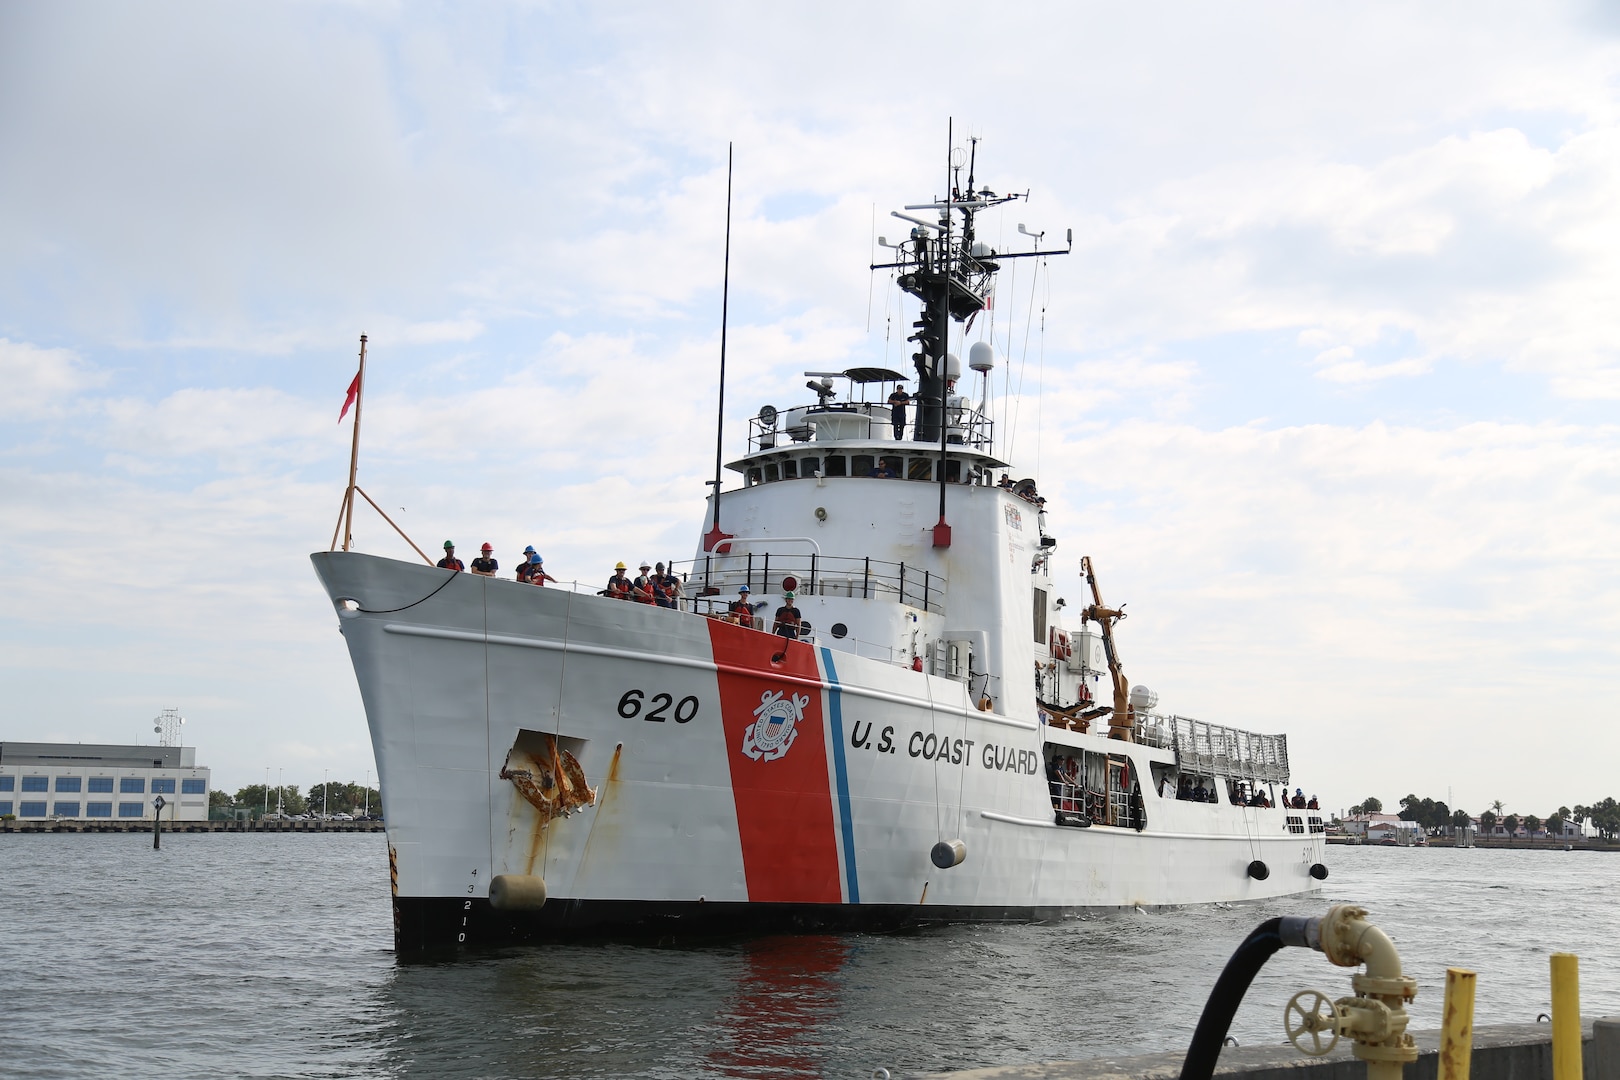 The crew of the Coast Guard Cutter Resolute (WMEC-620) return to homeport Apr. 25, 2023, after being on patrol for over 62 days. During patrol the crew of the Cutter Resolute worked on enforcing counter narcotics laws, deterring illegal migration and conducting search and rescue in support of Operation Vigilant Sentry. (U.S. Coast Guard photo by Petty Officer 3rd Class Erik Villa Rodriguez)